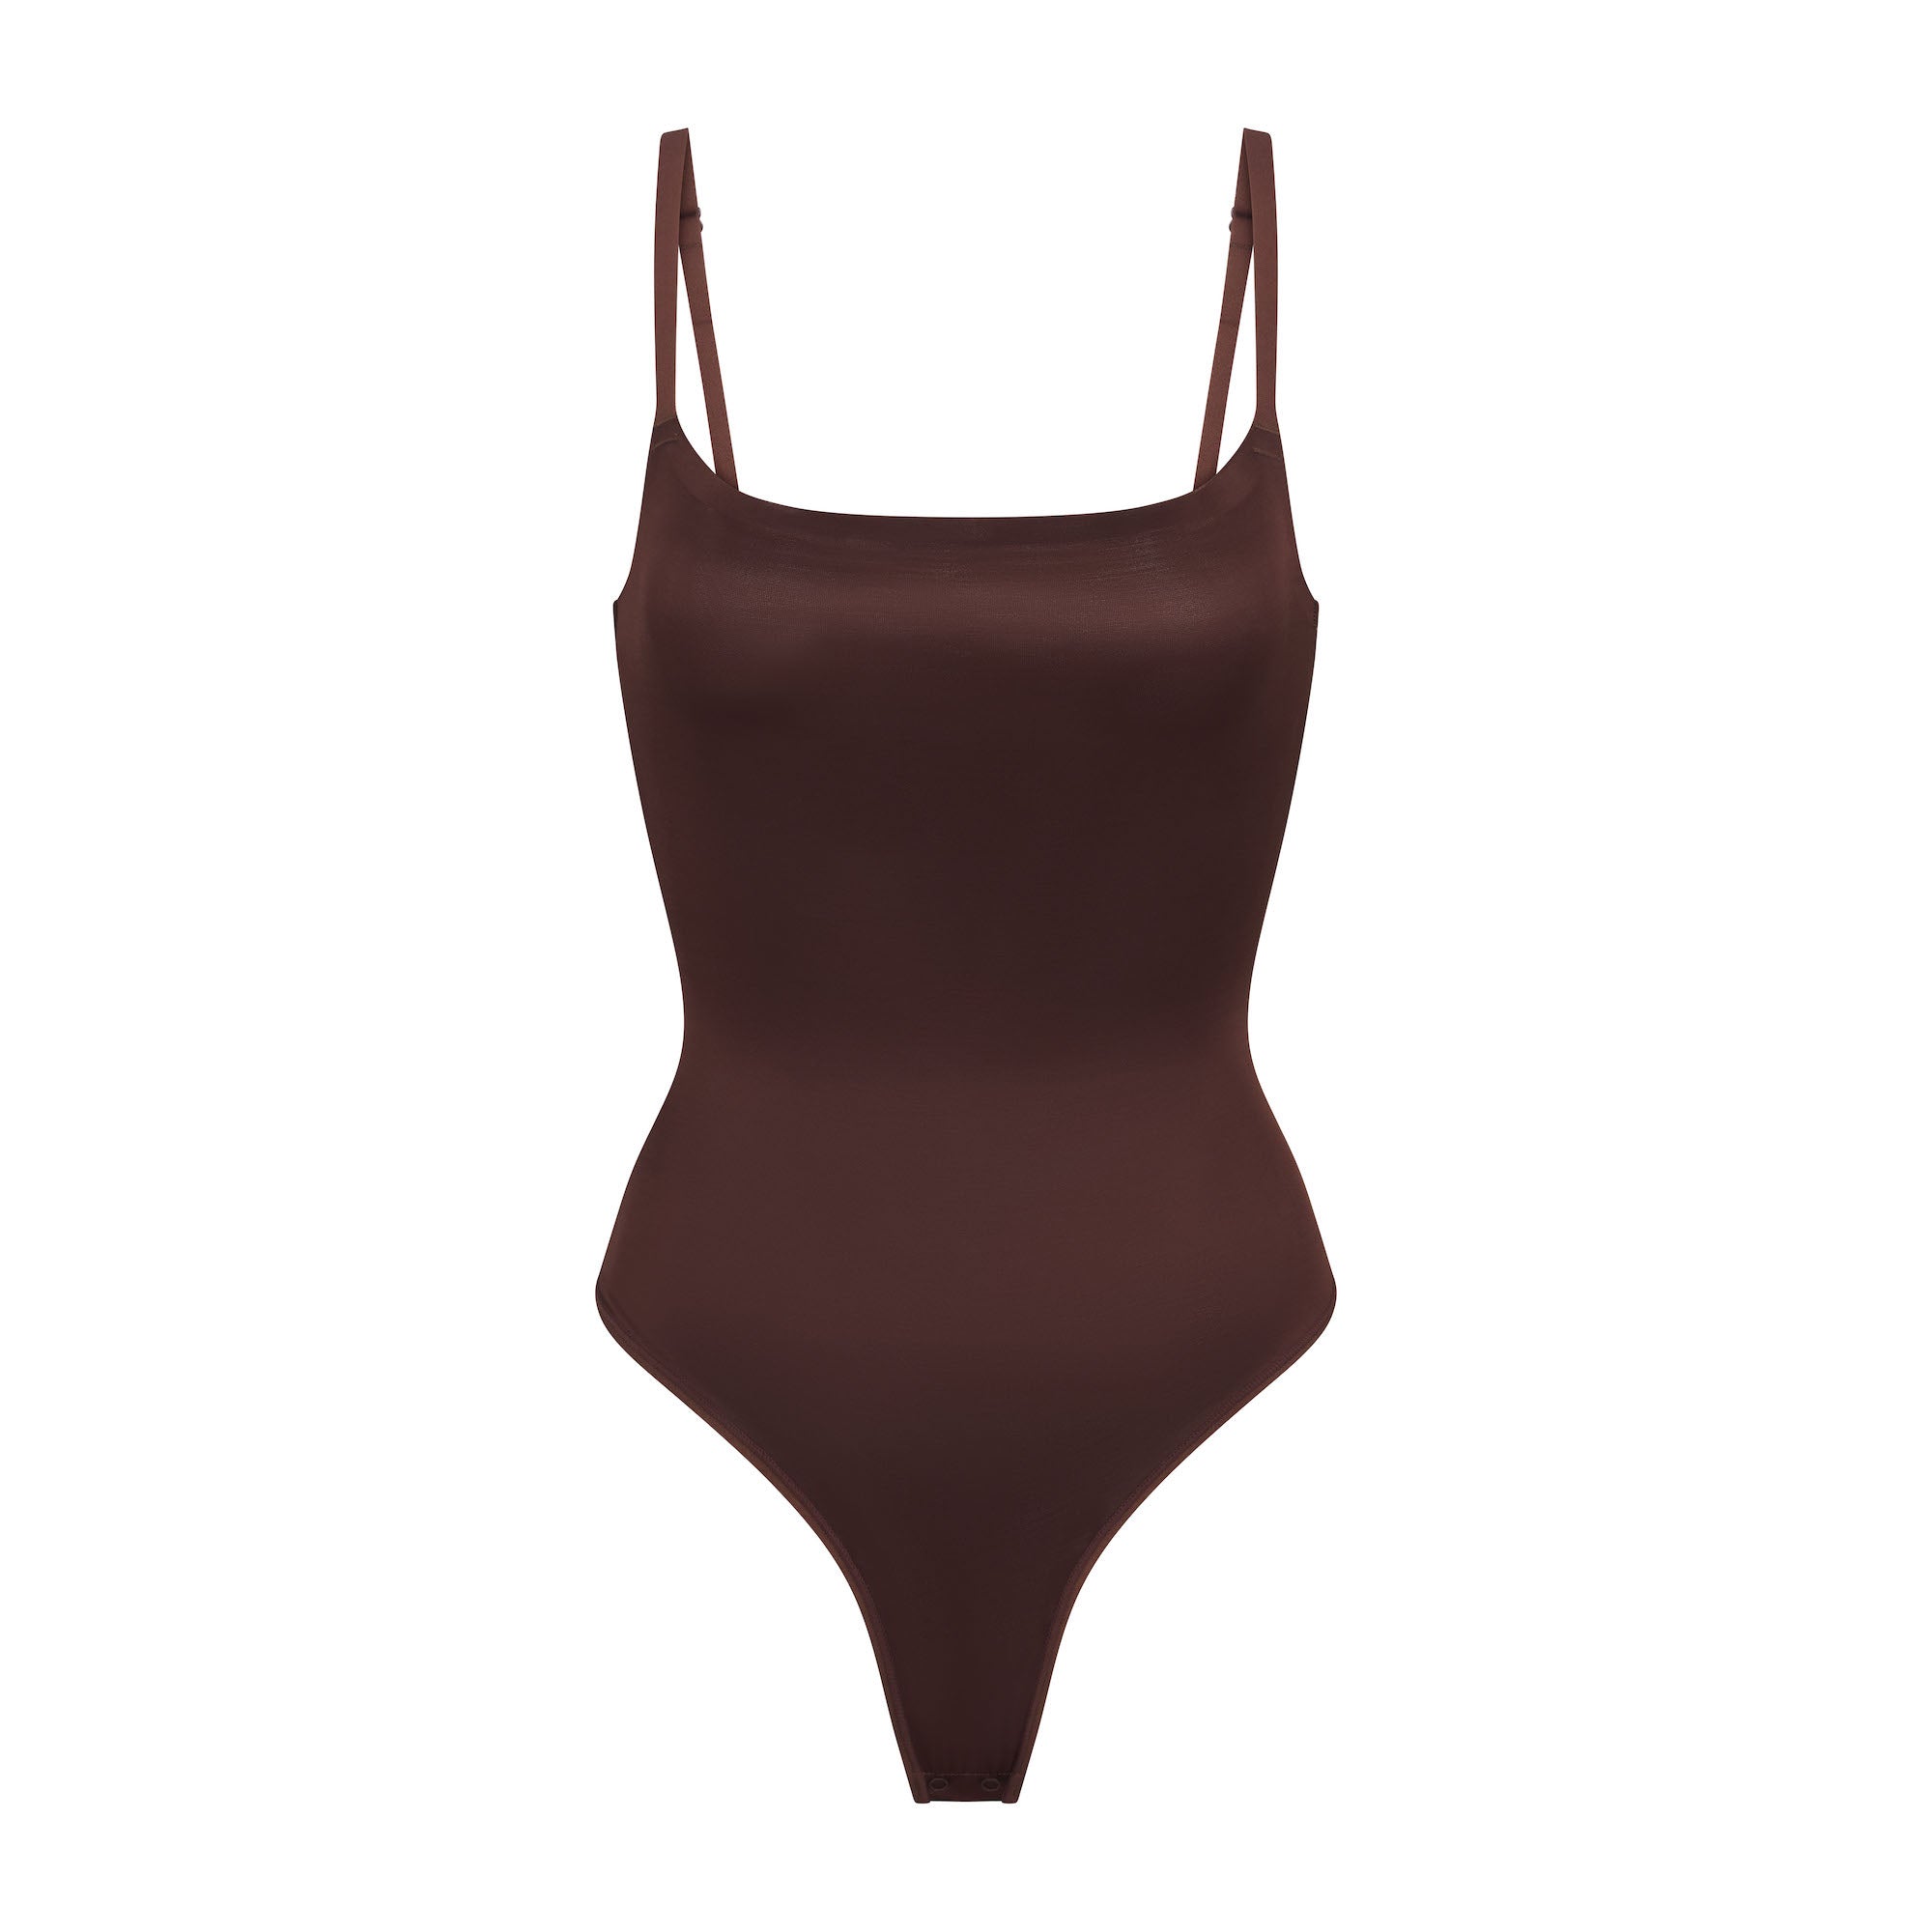 BARELY THERE SCOOP BODYSUIT | COCOA - BARELY THERE SCOOP BODYSUIT | COCOA